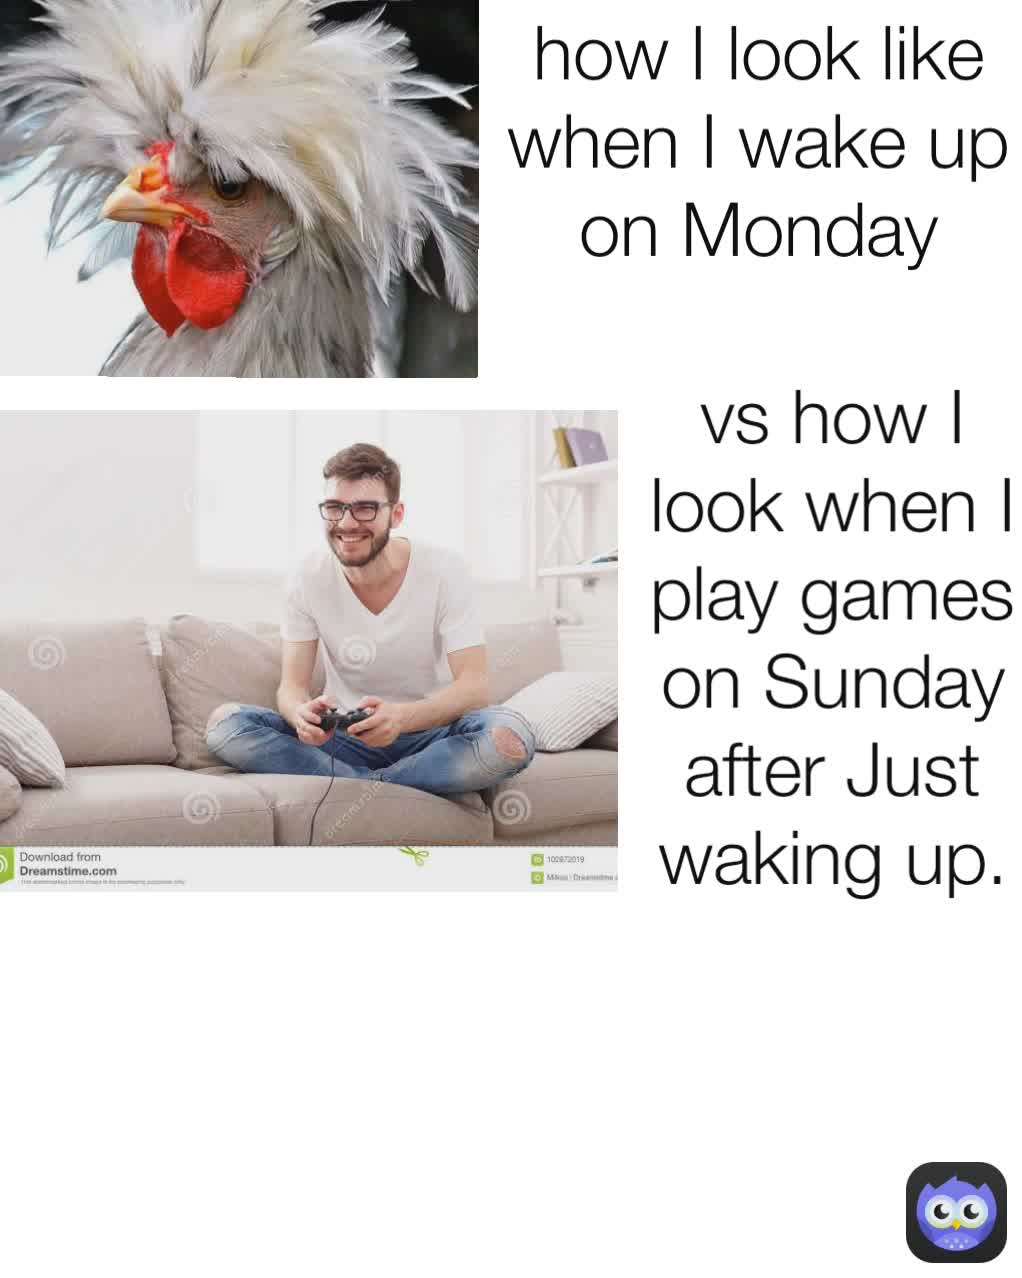 how I look like when I wake up on Monday vs how I look when I play games on Sunday after Just waking up.